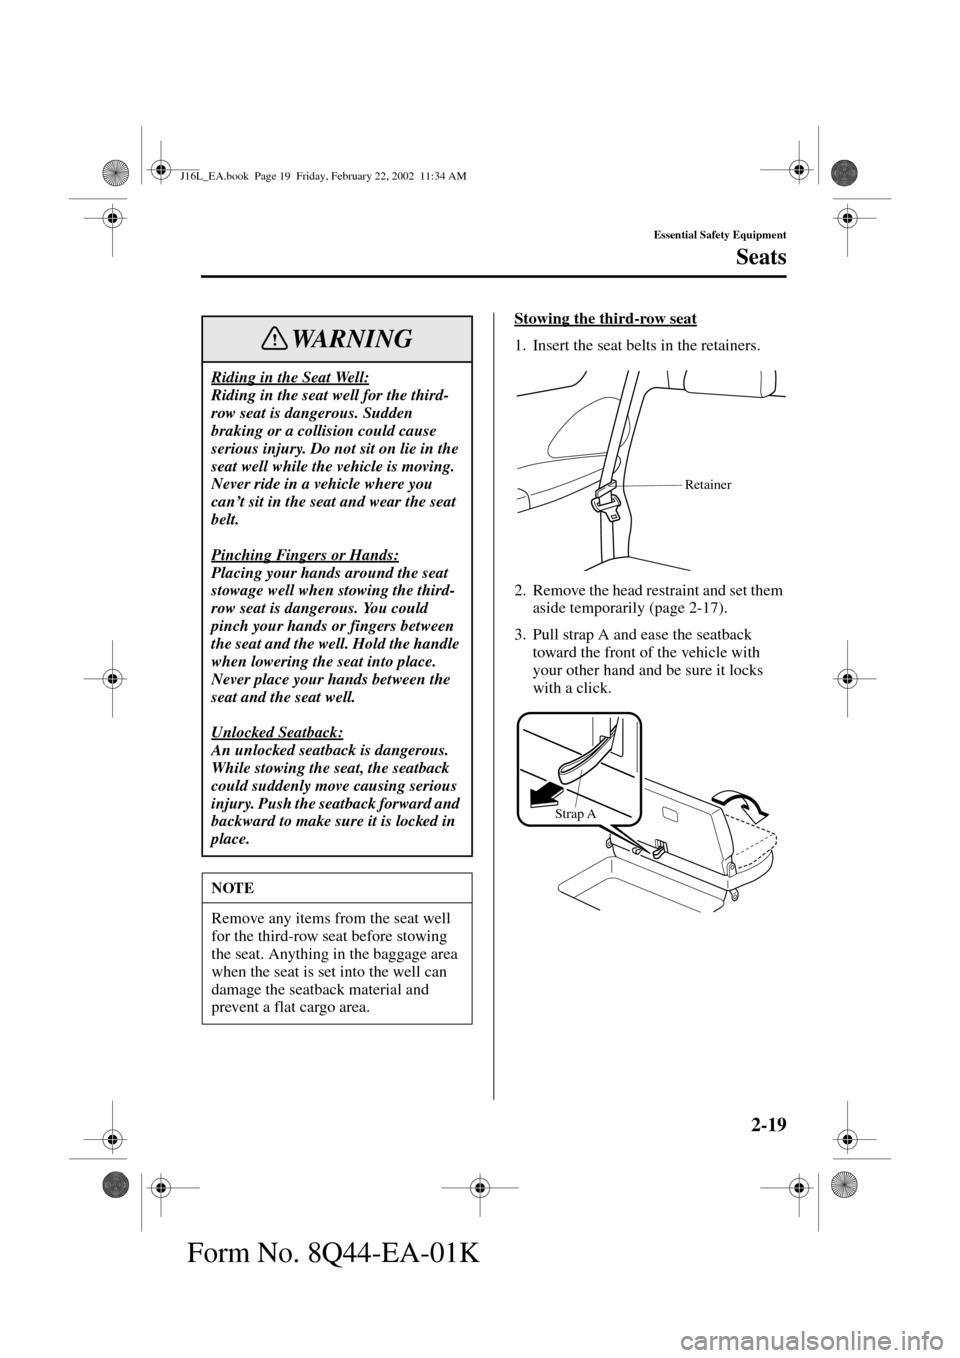 MAZDA MODEL MPV 2002   (in English) Owners Manual 2-19
Essential Safety Equipment
Seats
Form No. 8Q44-EA-01K
Stowing the third-row seat
1. Insert the seat belts in the retainers.
2. Remove the head restraint and set them 
aside temporarily (page 2-17